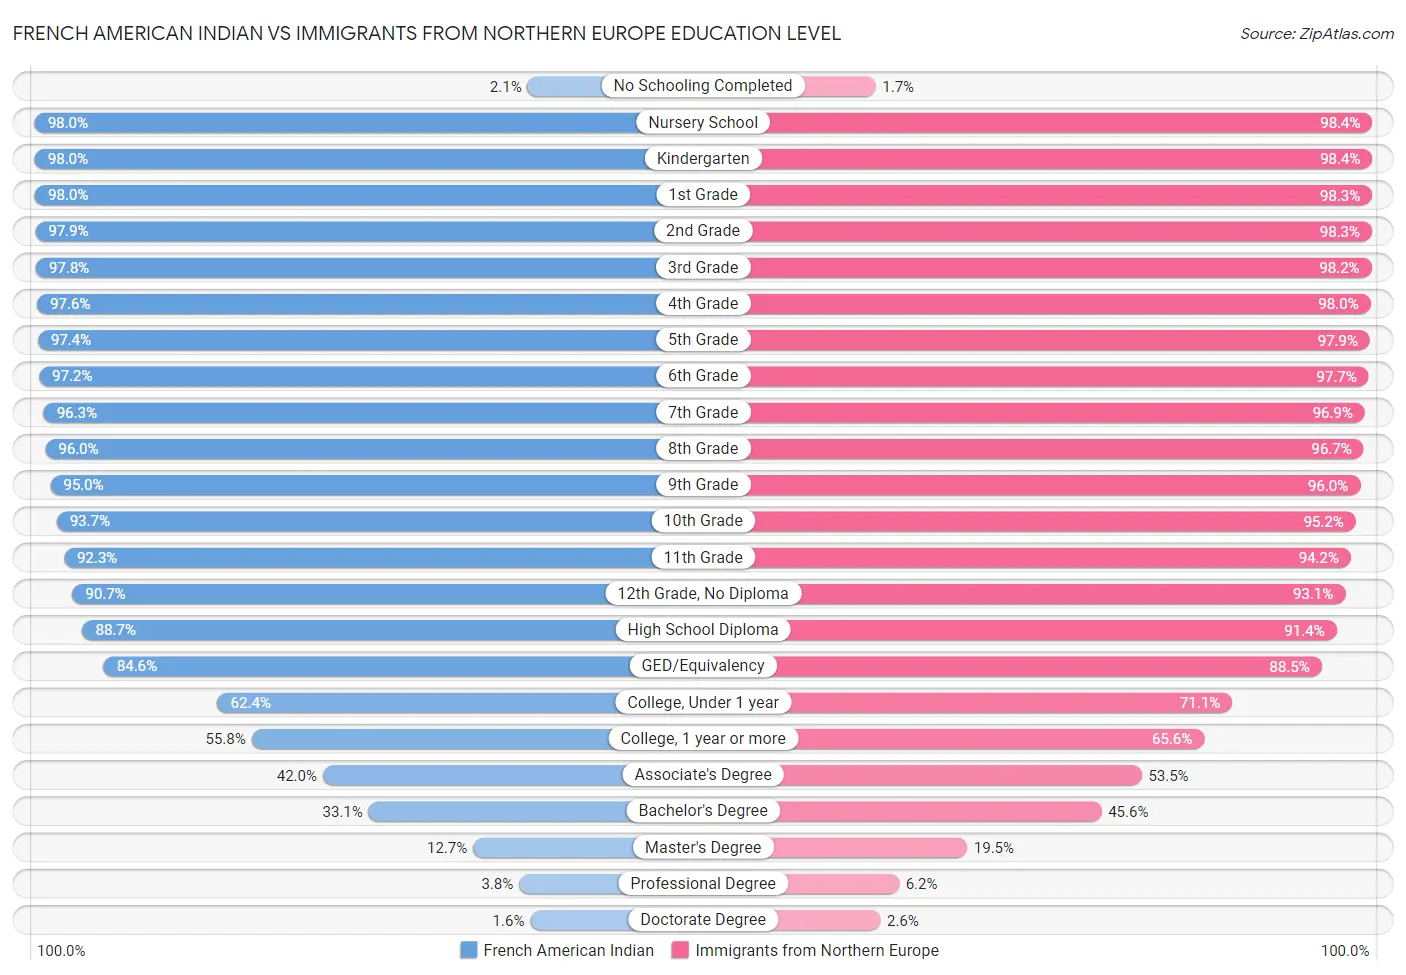 French American Indian vs Immigrants from Northern Europe Education Level